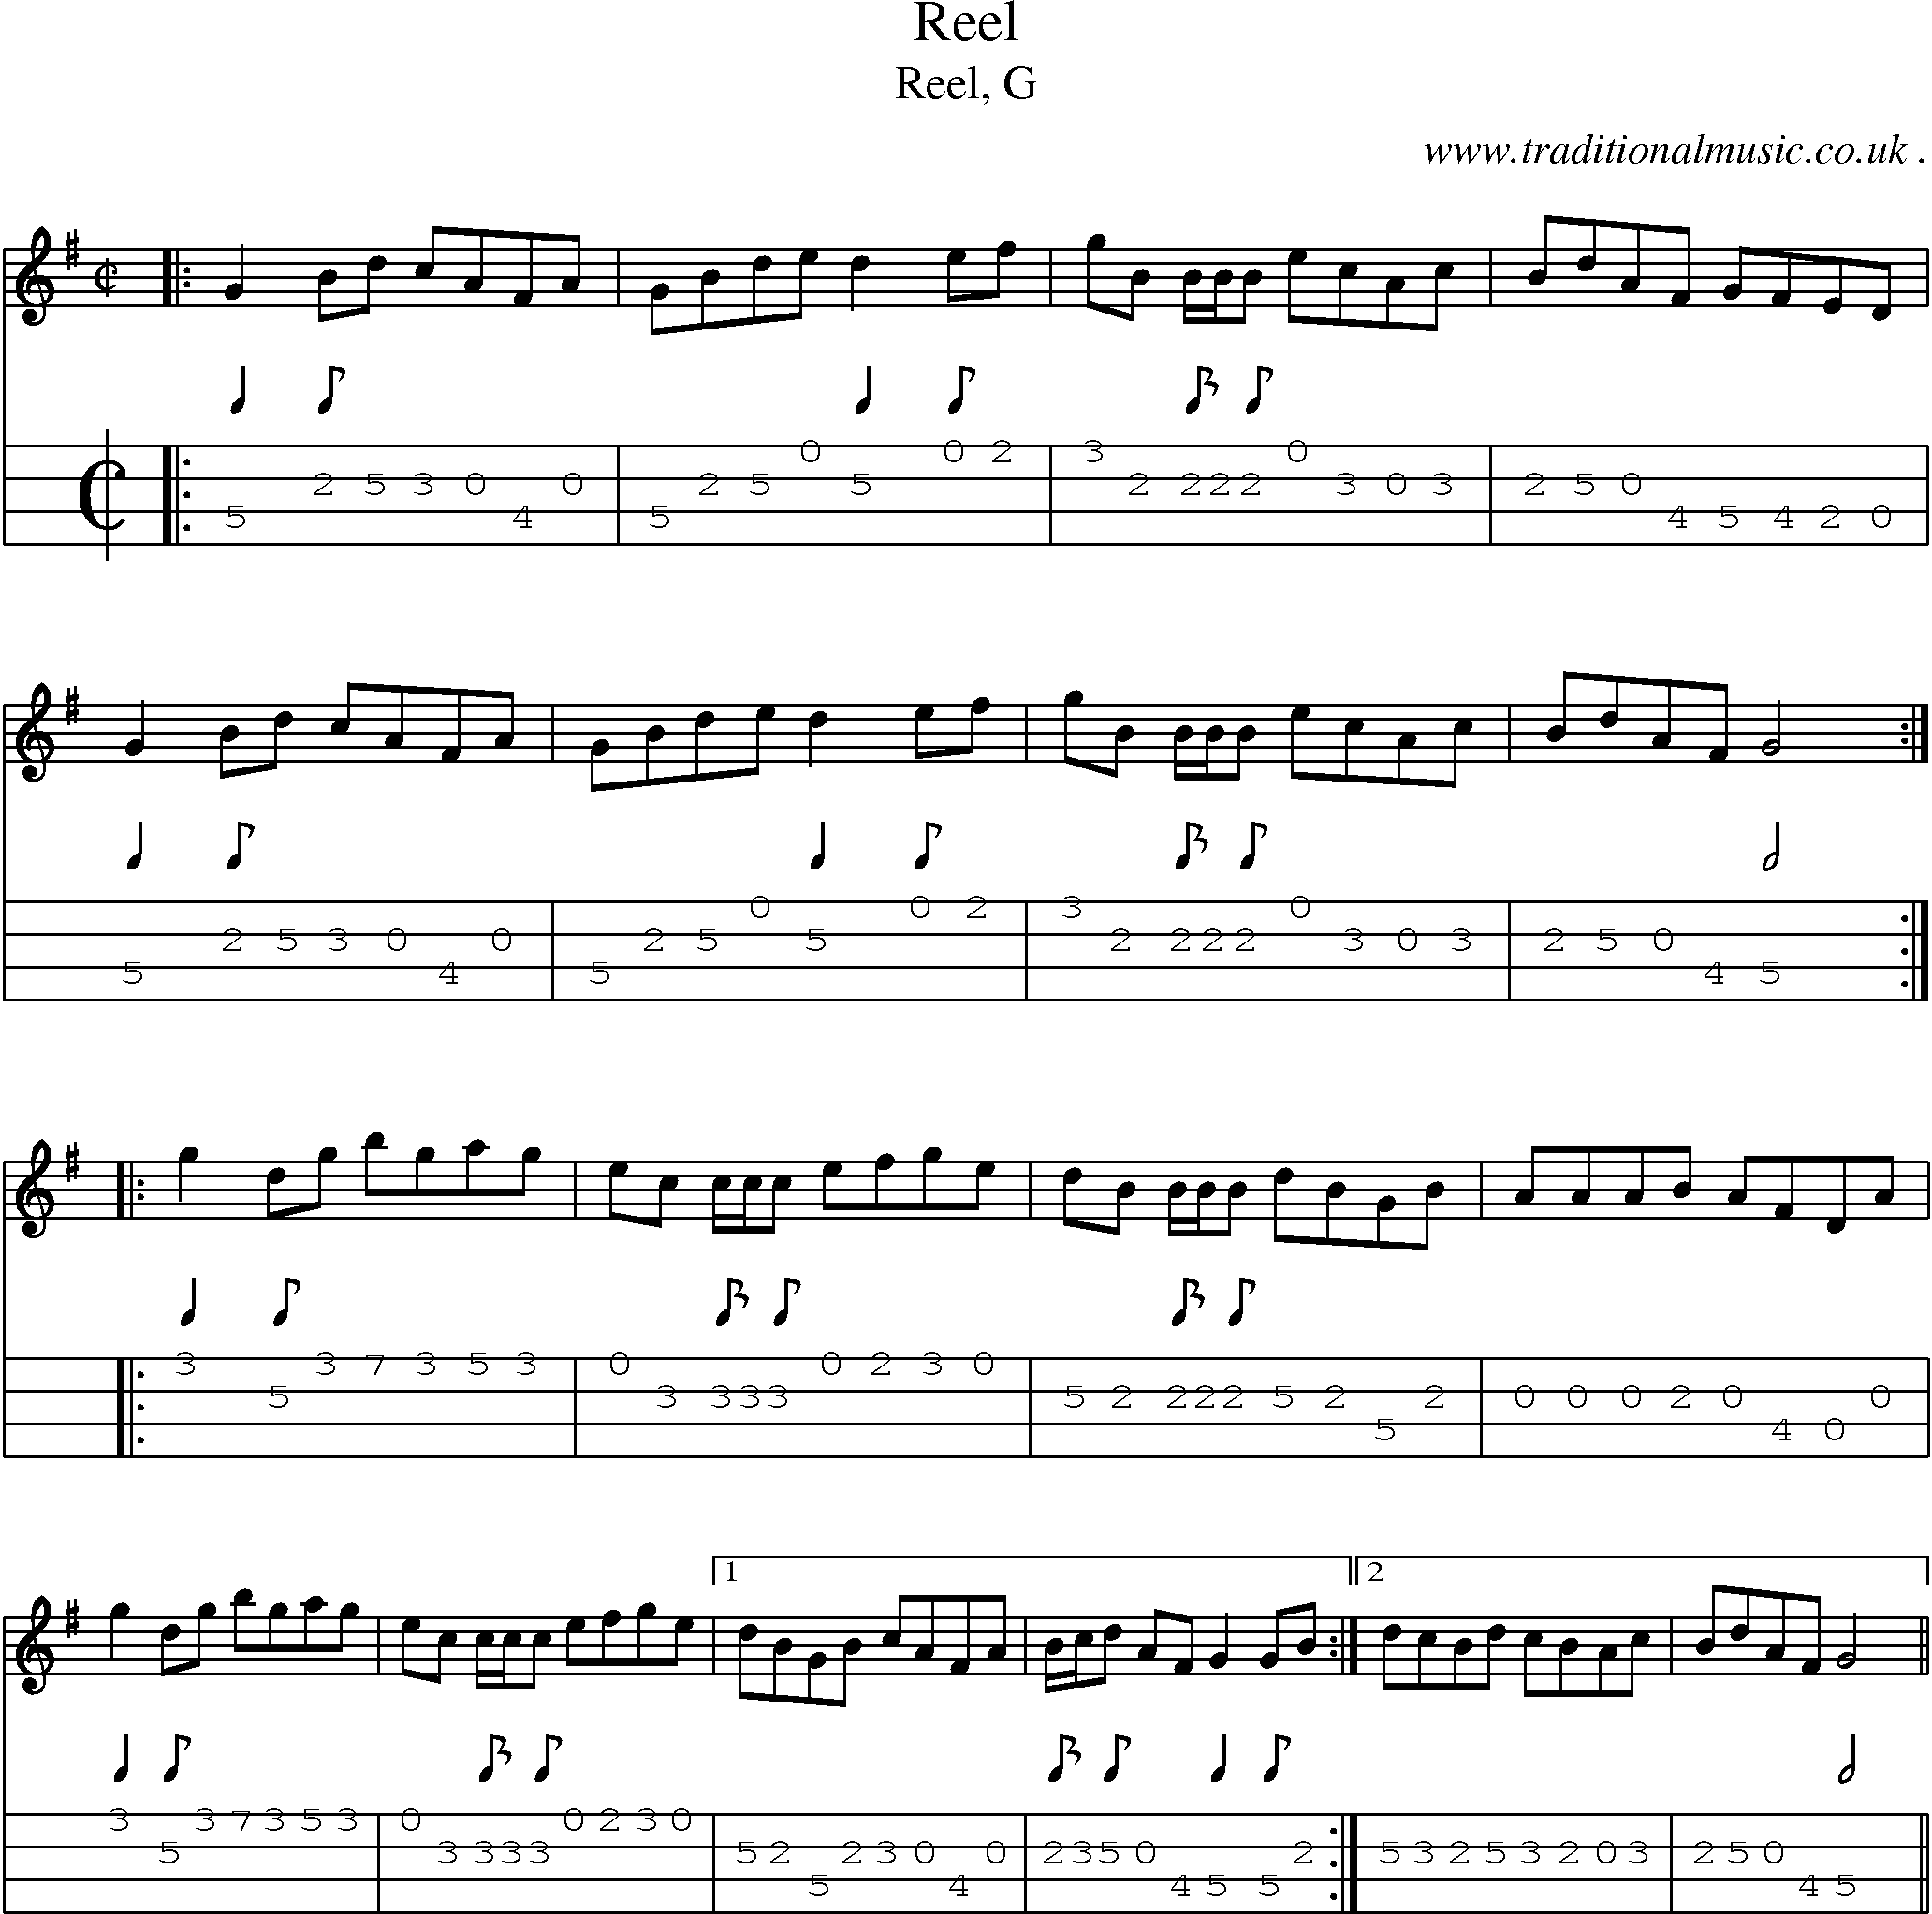 Sheet-music  score, Chords and Mandolin Tabs for Reel